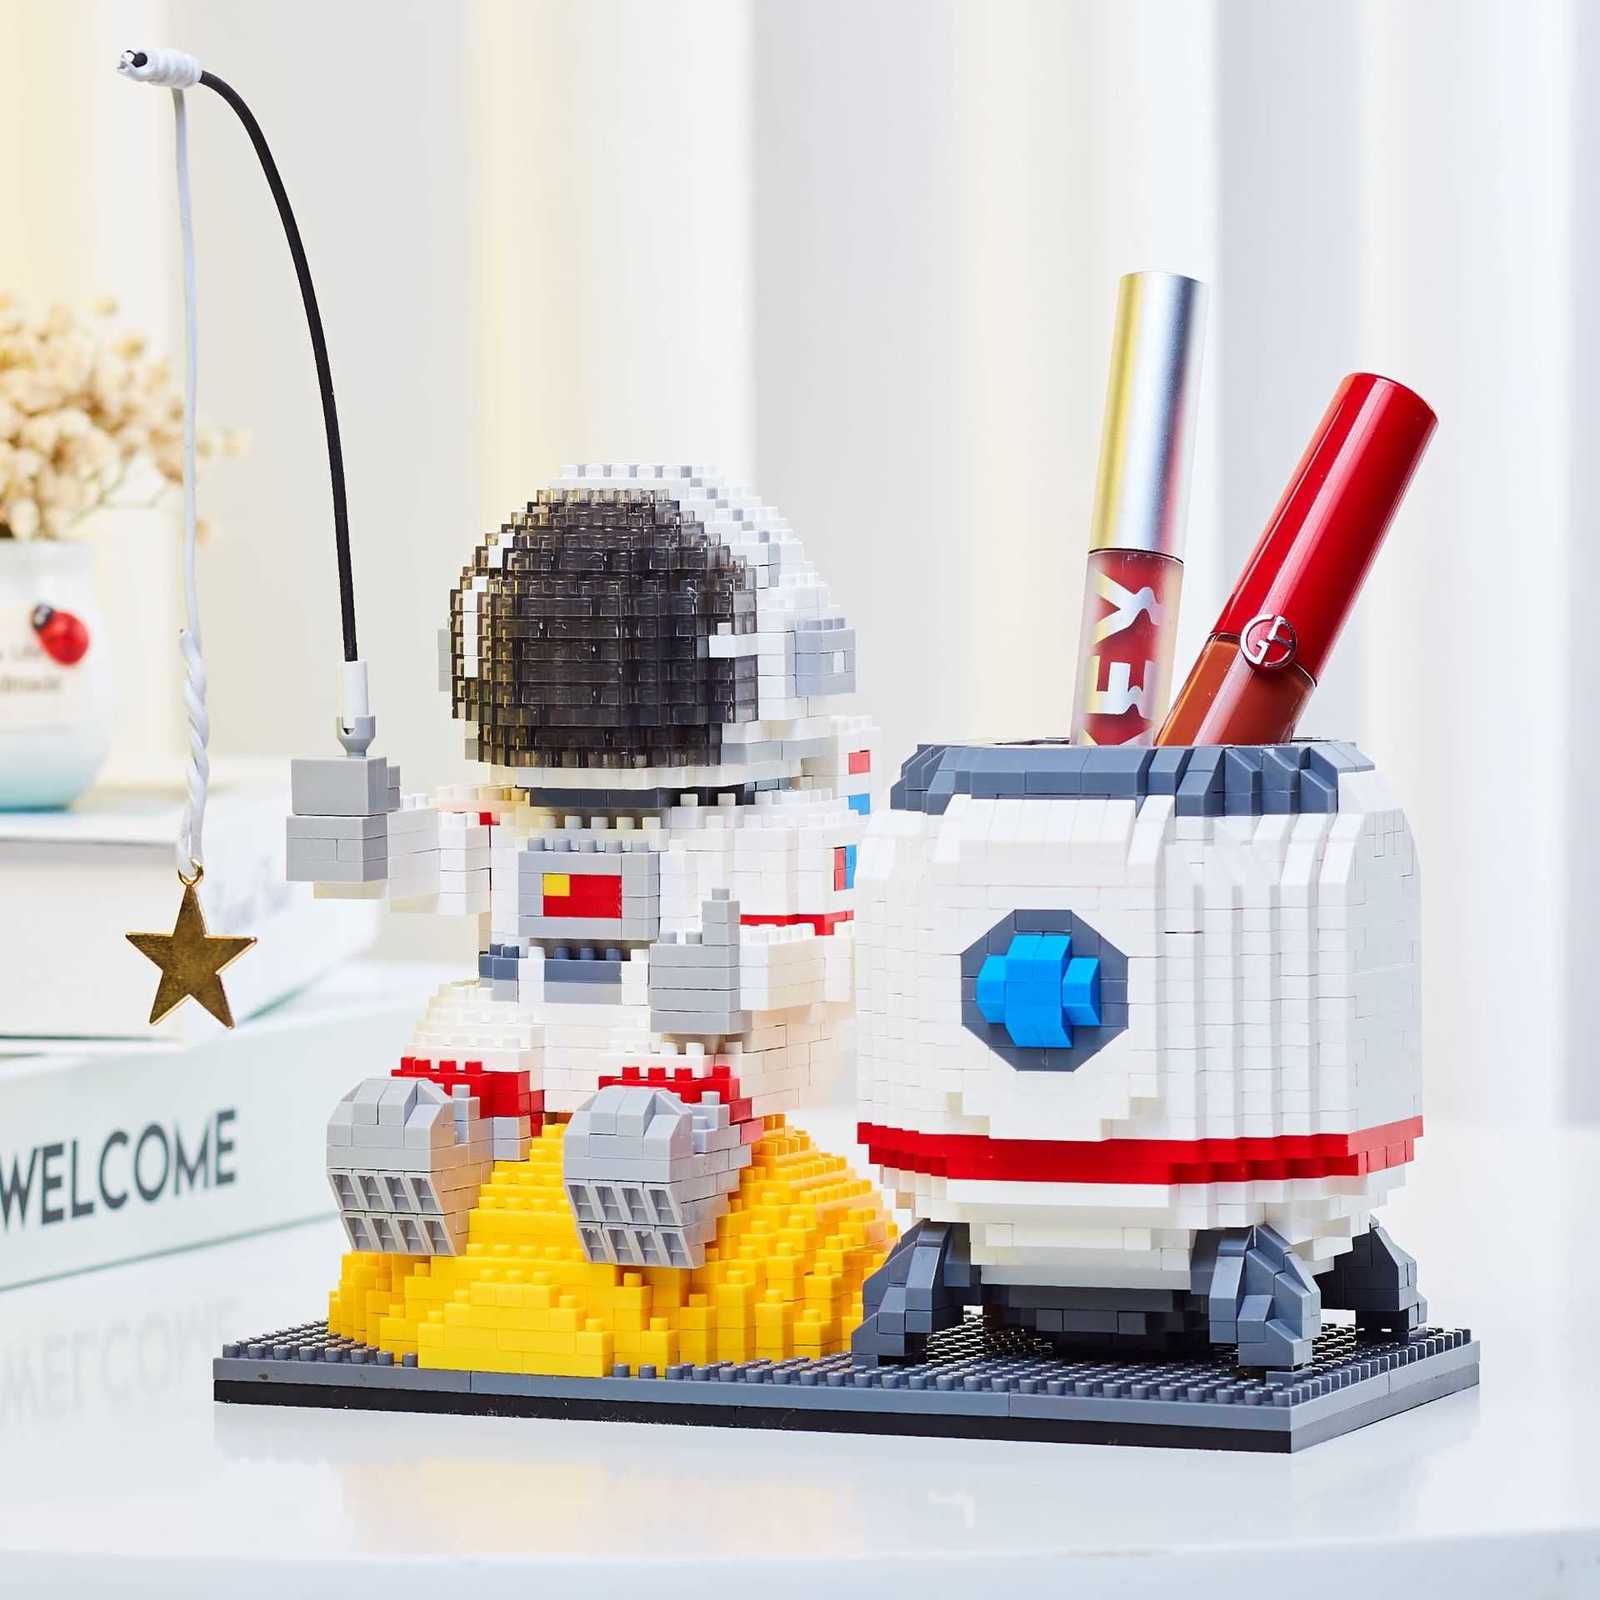 

Blocks Lego Compatible Astronaut Astronaut Pen Holder Small Particle Assembled Building Block Toy Boys and Girls Gift